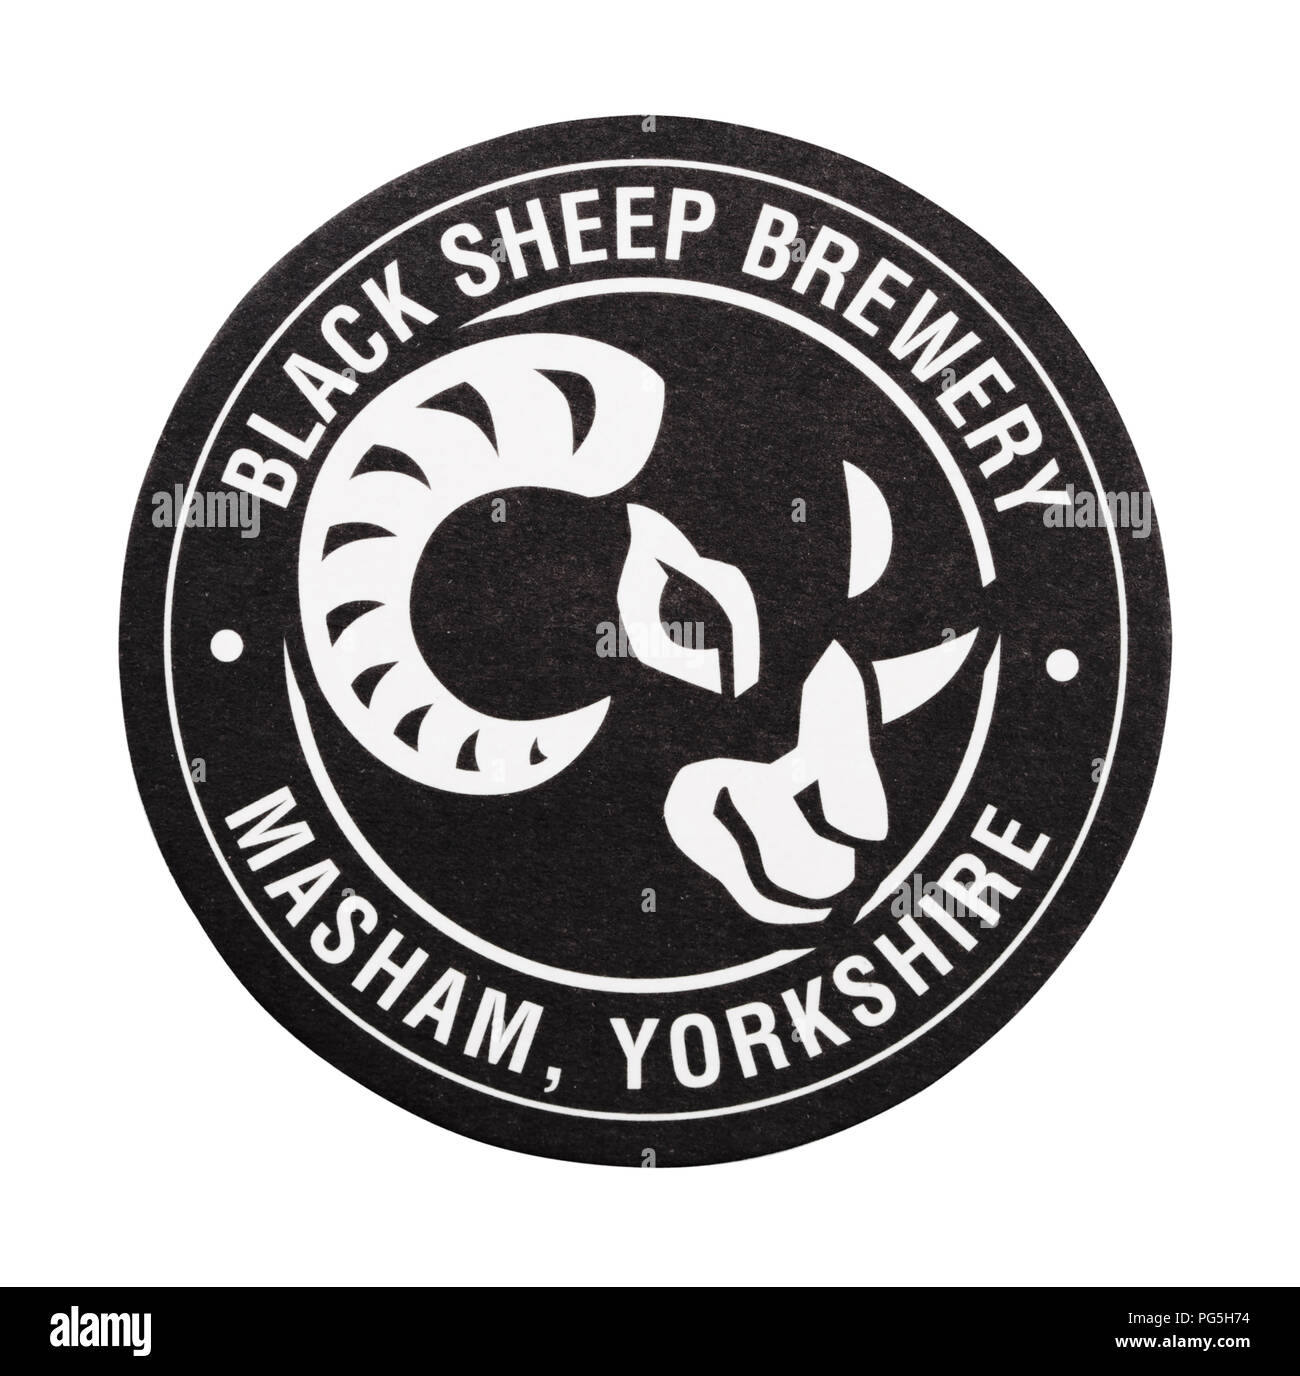 LONDON, UK - AUGUST 22, 2018: Black Sheep Brewery beer beermat coaster isolated on white background. Stock Photo